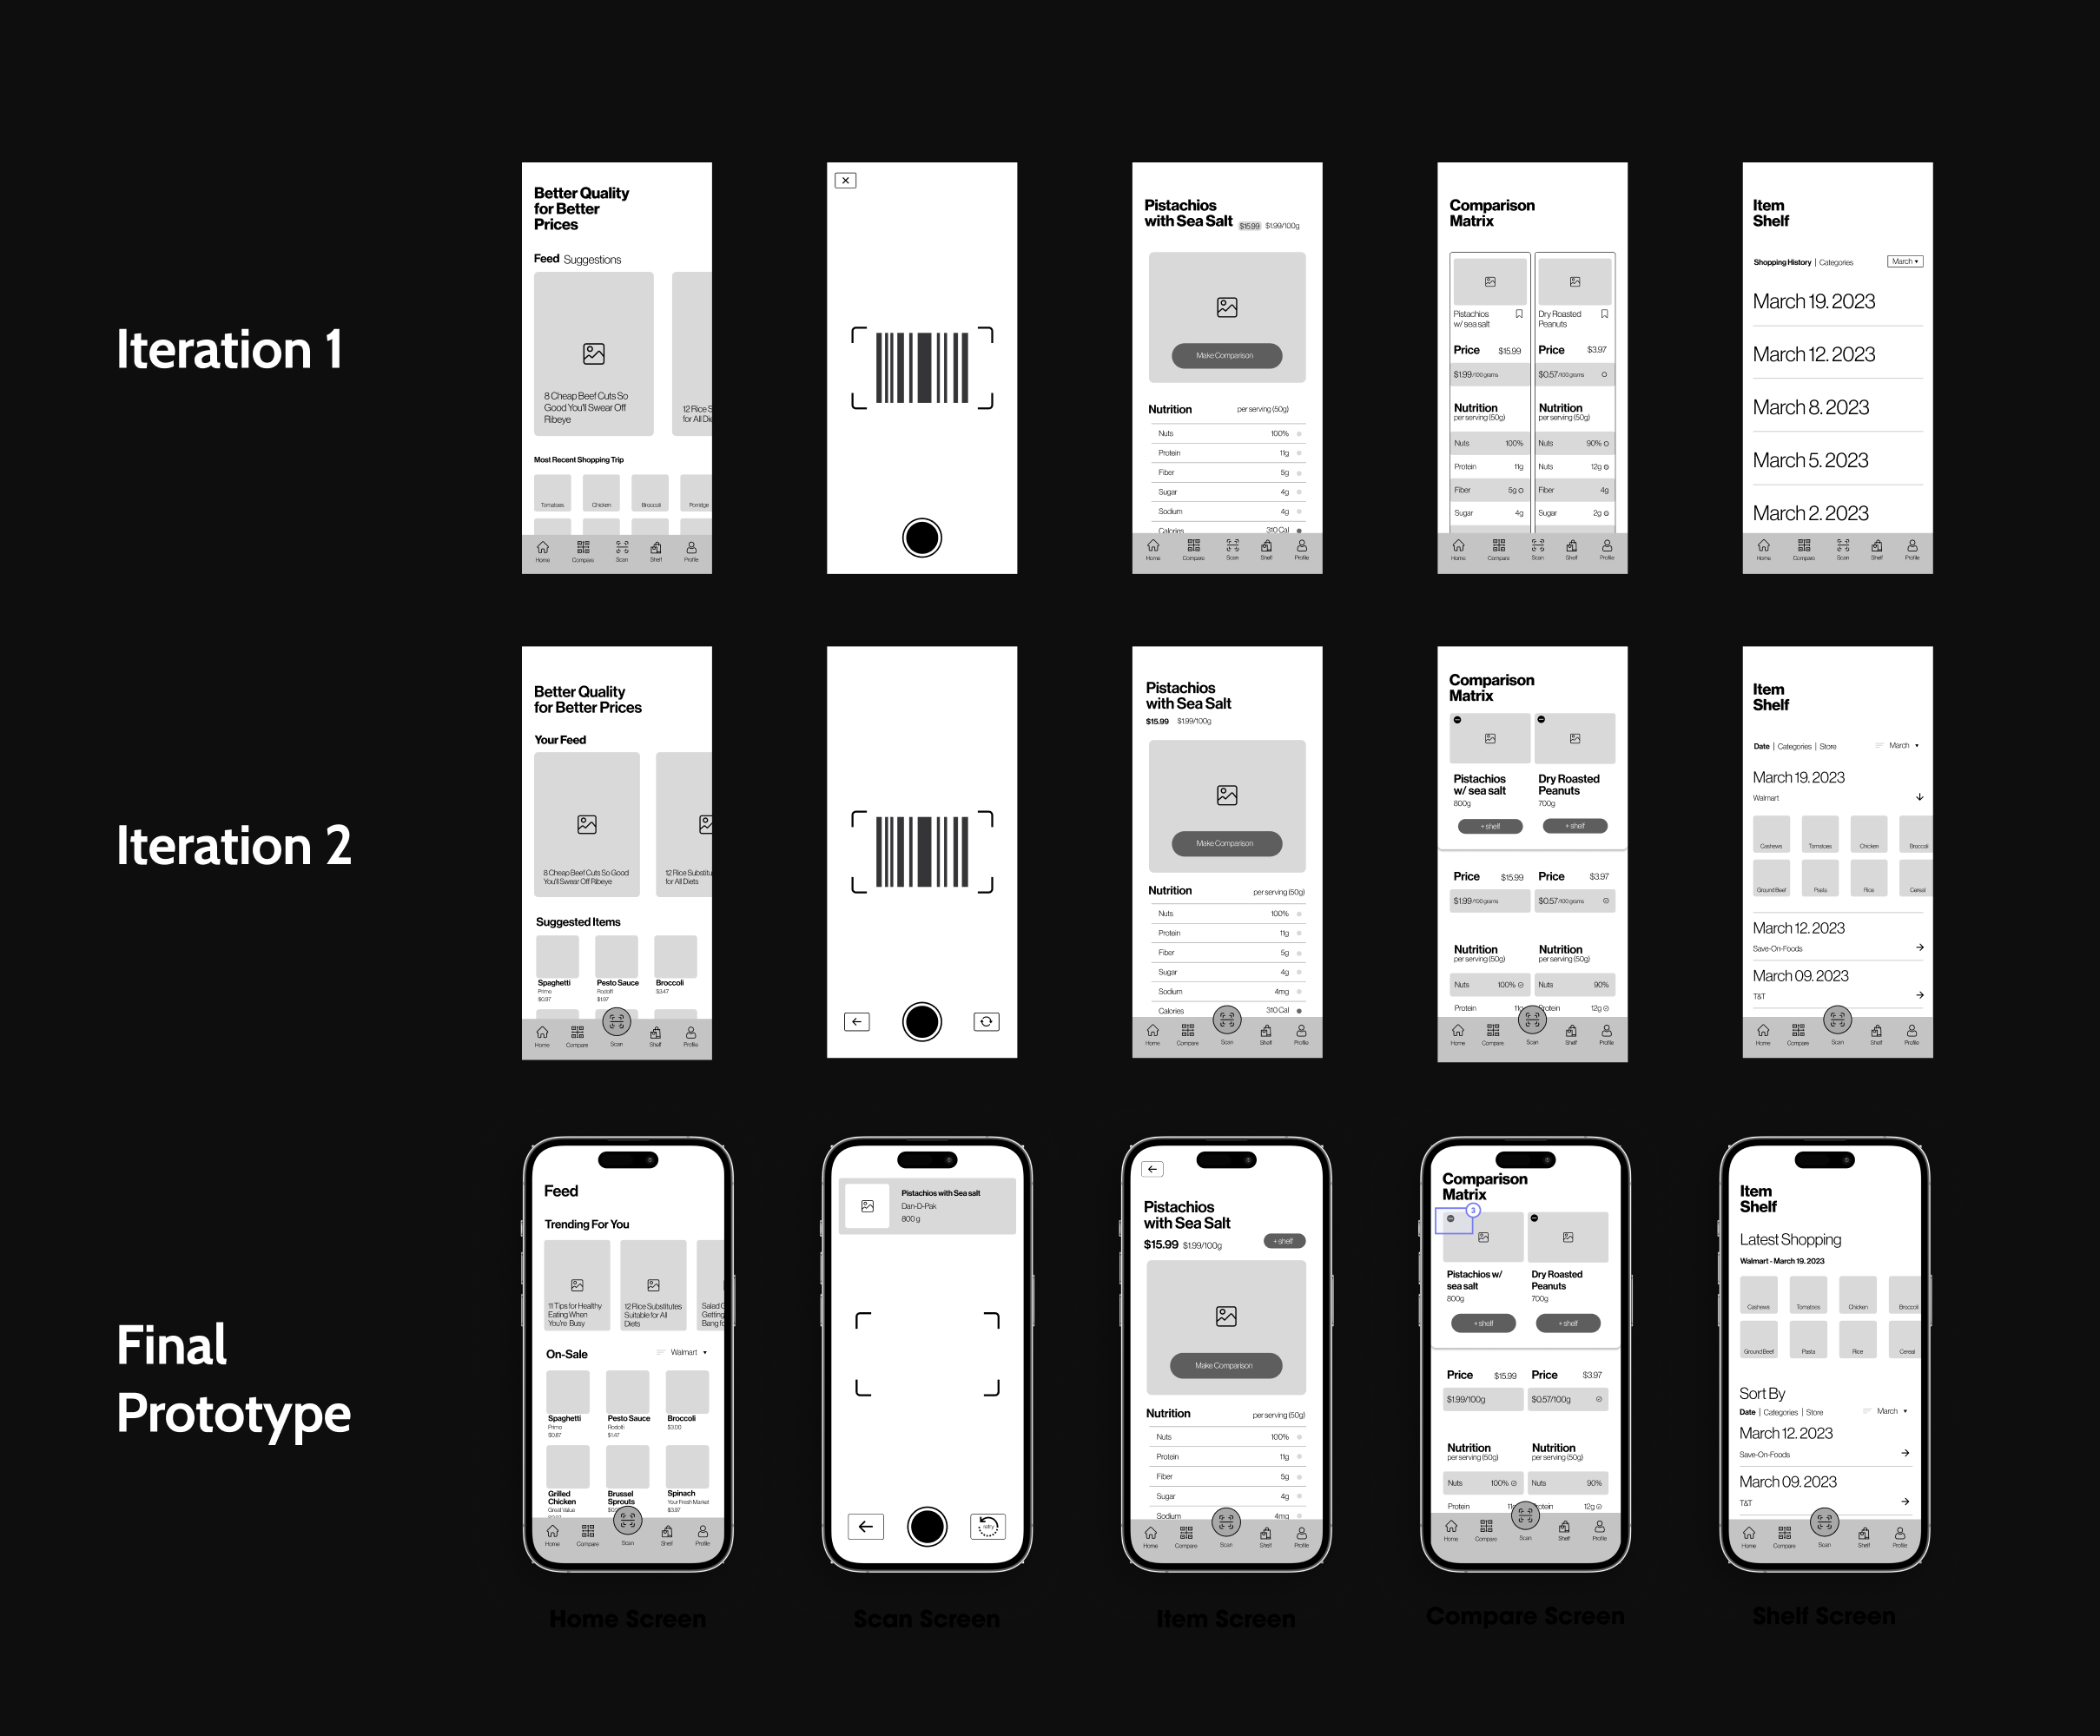 3 versions of my app prototyped and tested.